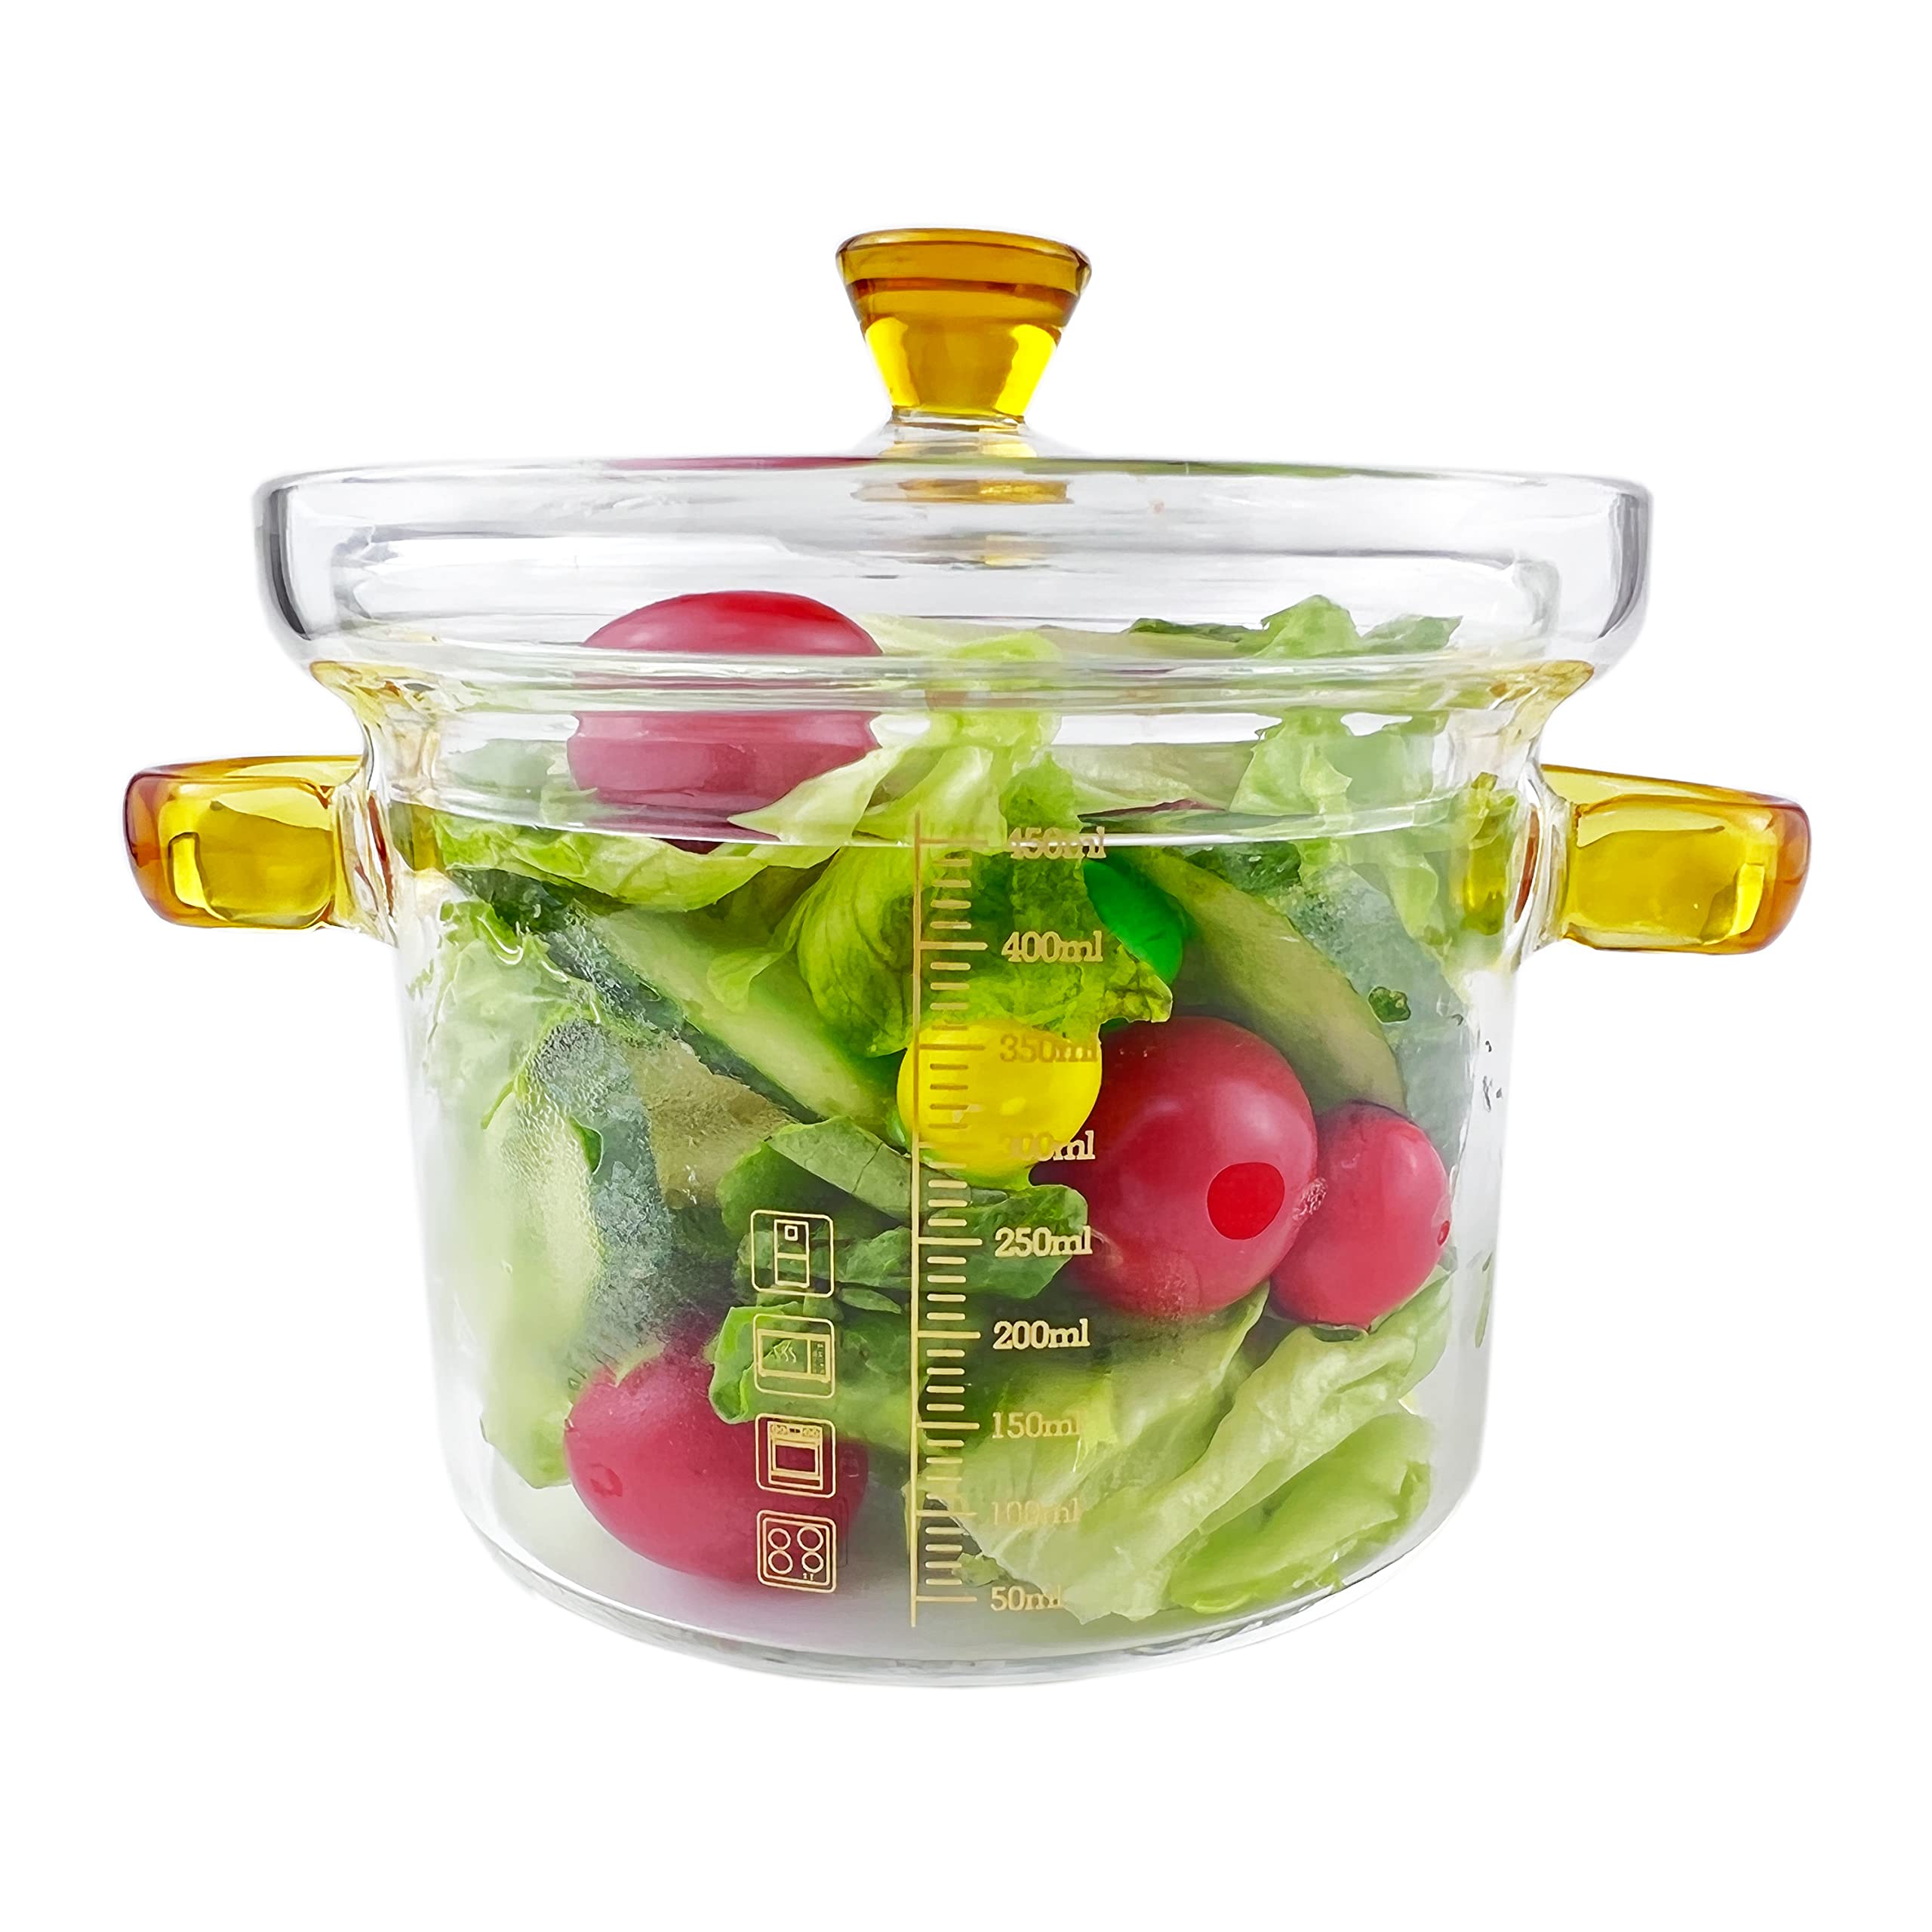 DEESUNG Glass Bowl with Handles and Lid, 15 OZ, With Measurement Marks, Food Grade High Borosilicate Glass, Measure Bowl, Bowl for Cereal, Dessert, Pasta, Salad and Soup